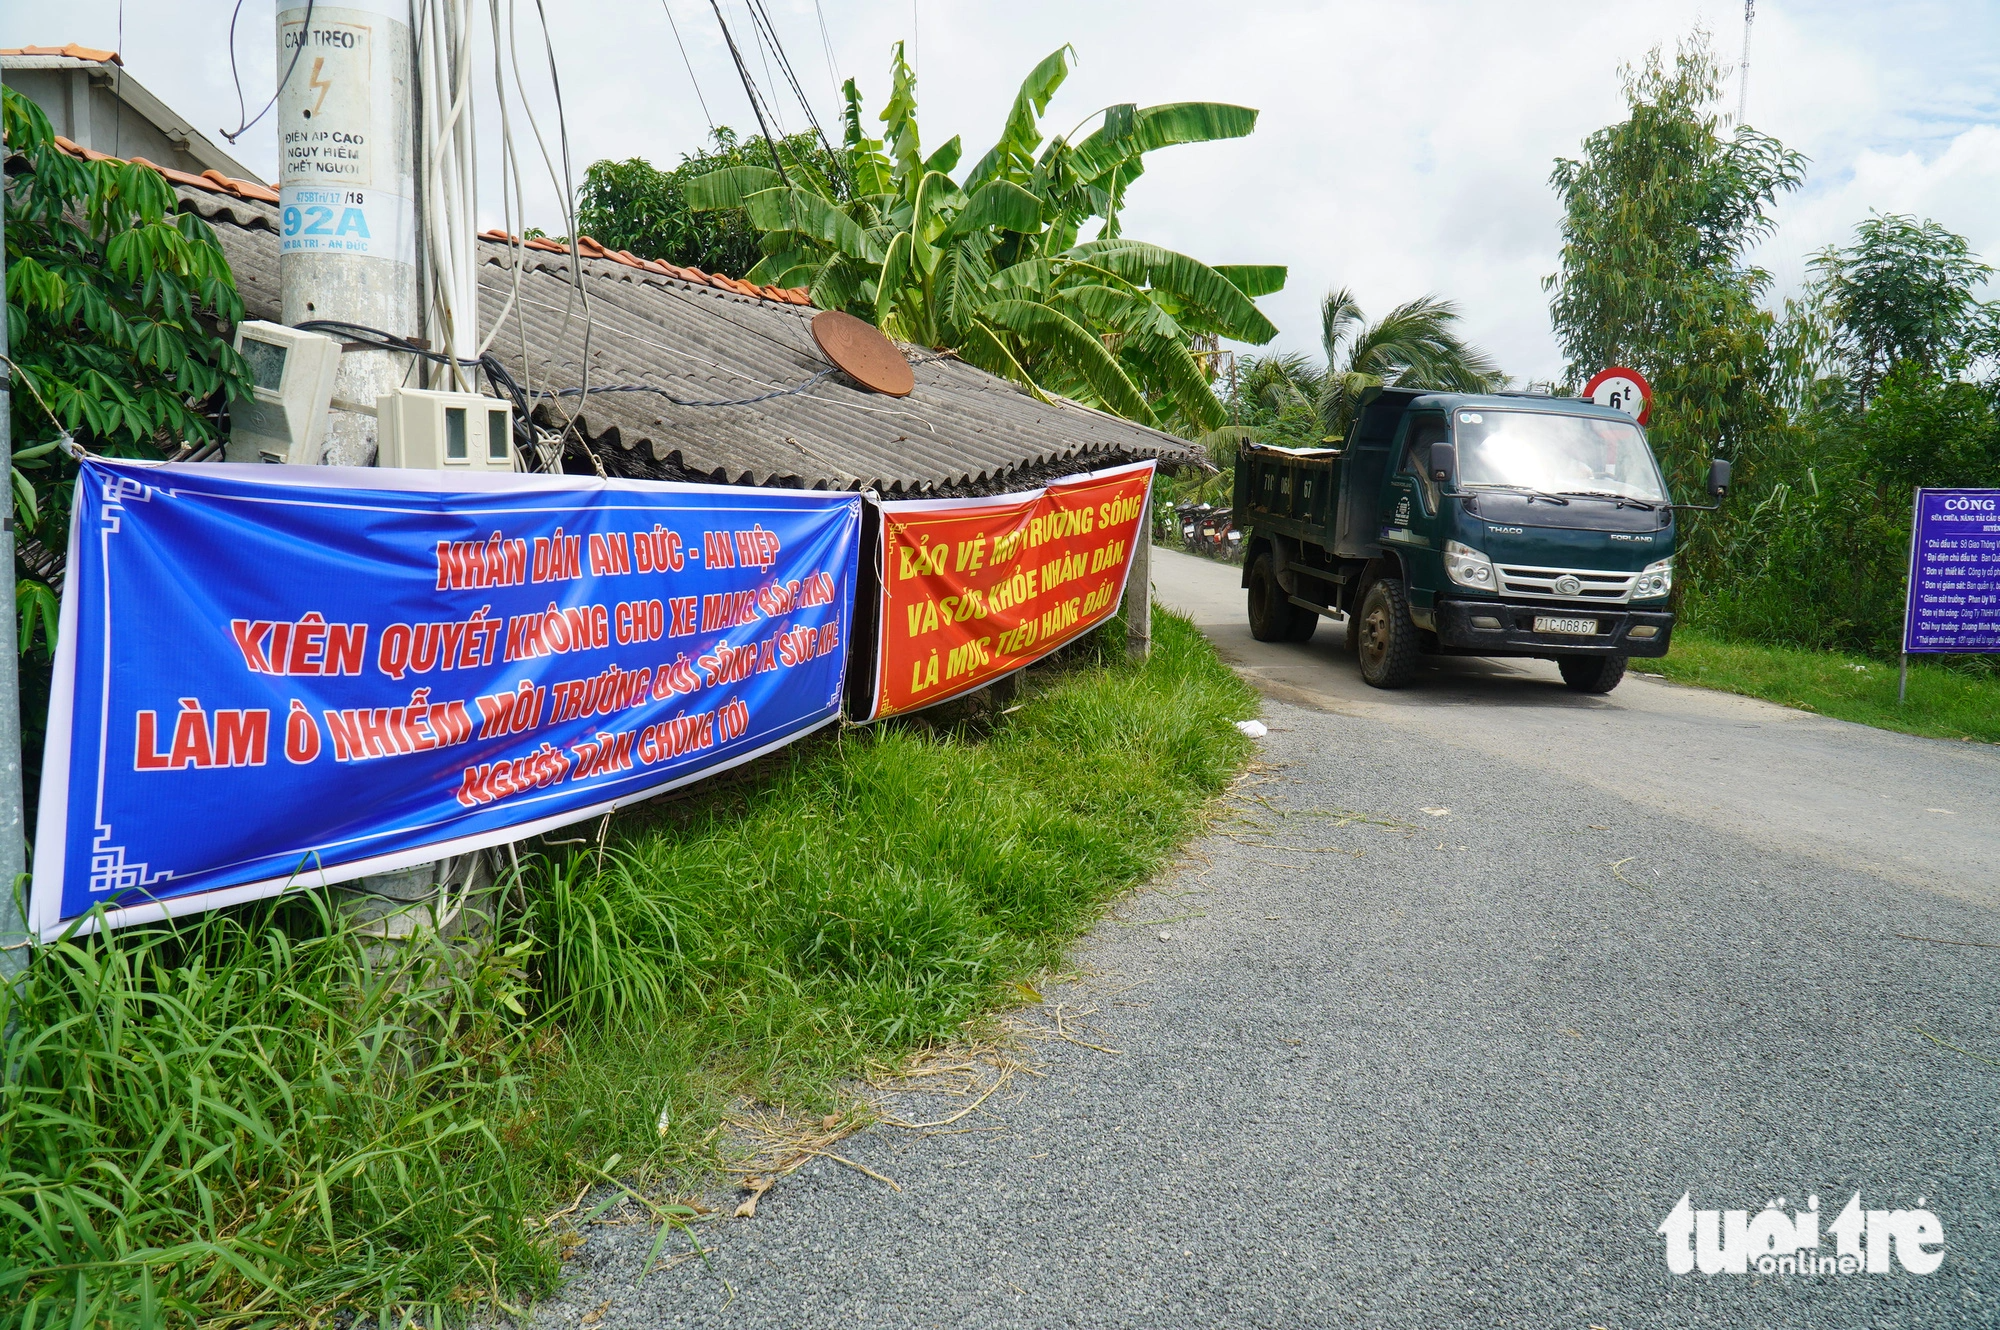 Residents hang banners around the landfill to voice their objections to its use. Photo: Mau Truong / Tuoi Tre